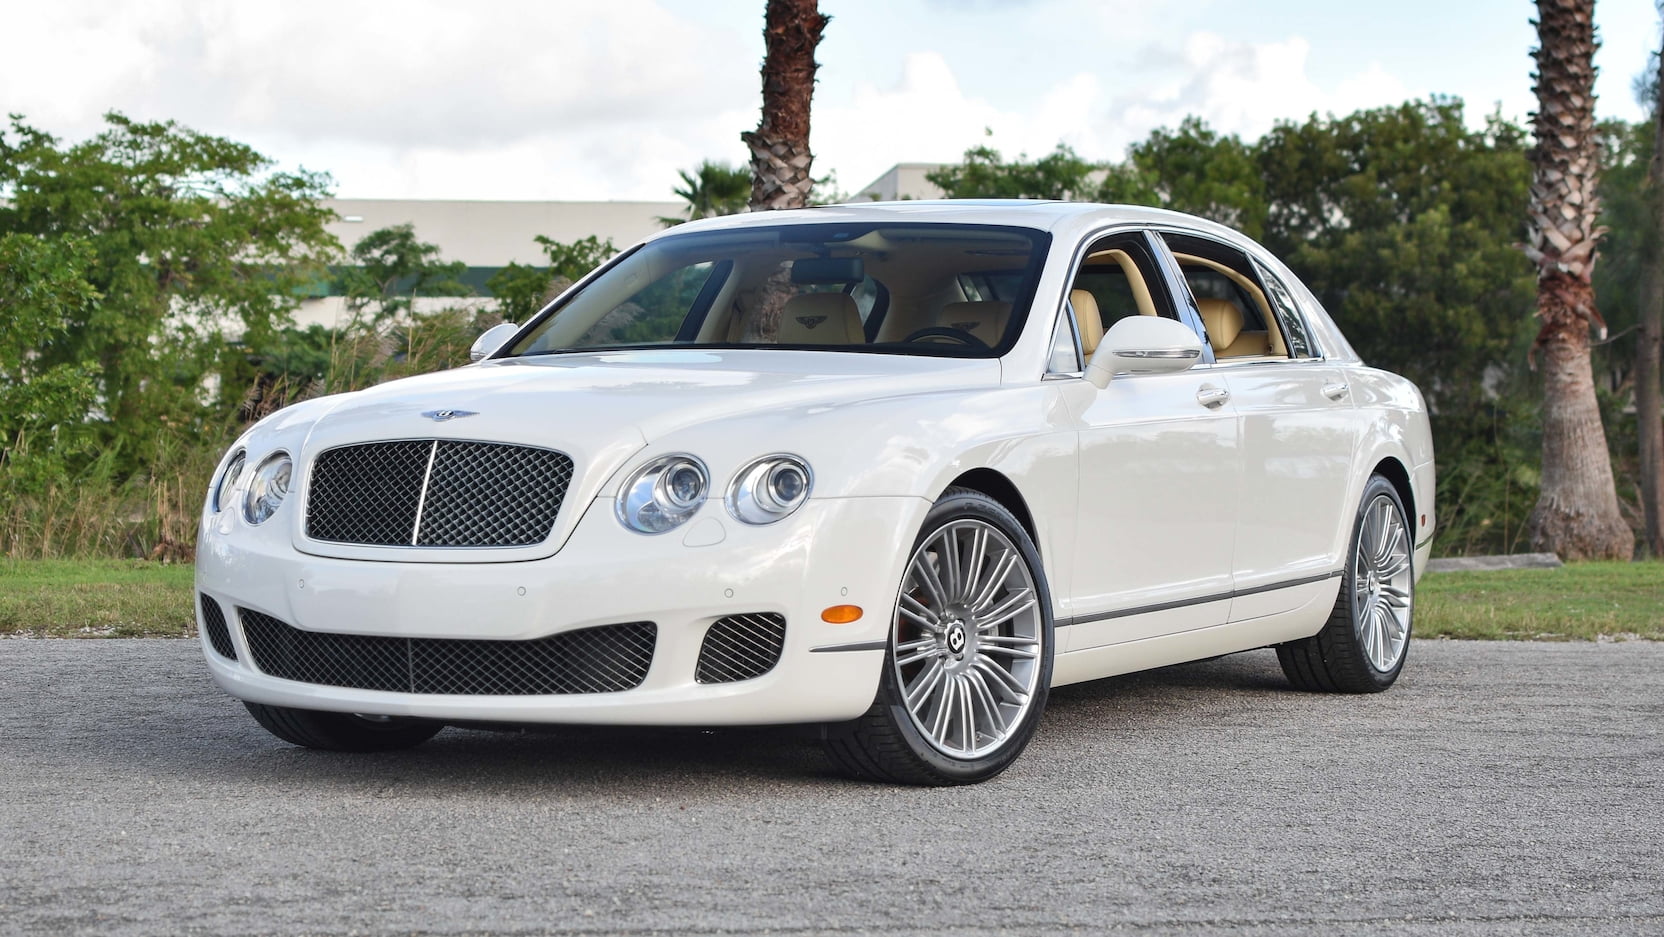 2010 Bentley Flying Spur | T160.1 | Kissimmee 2018